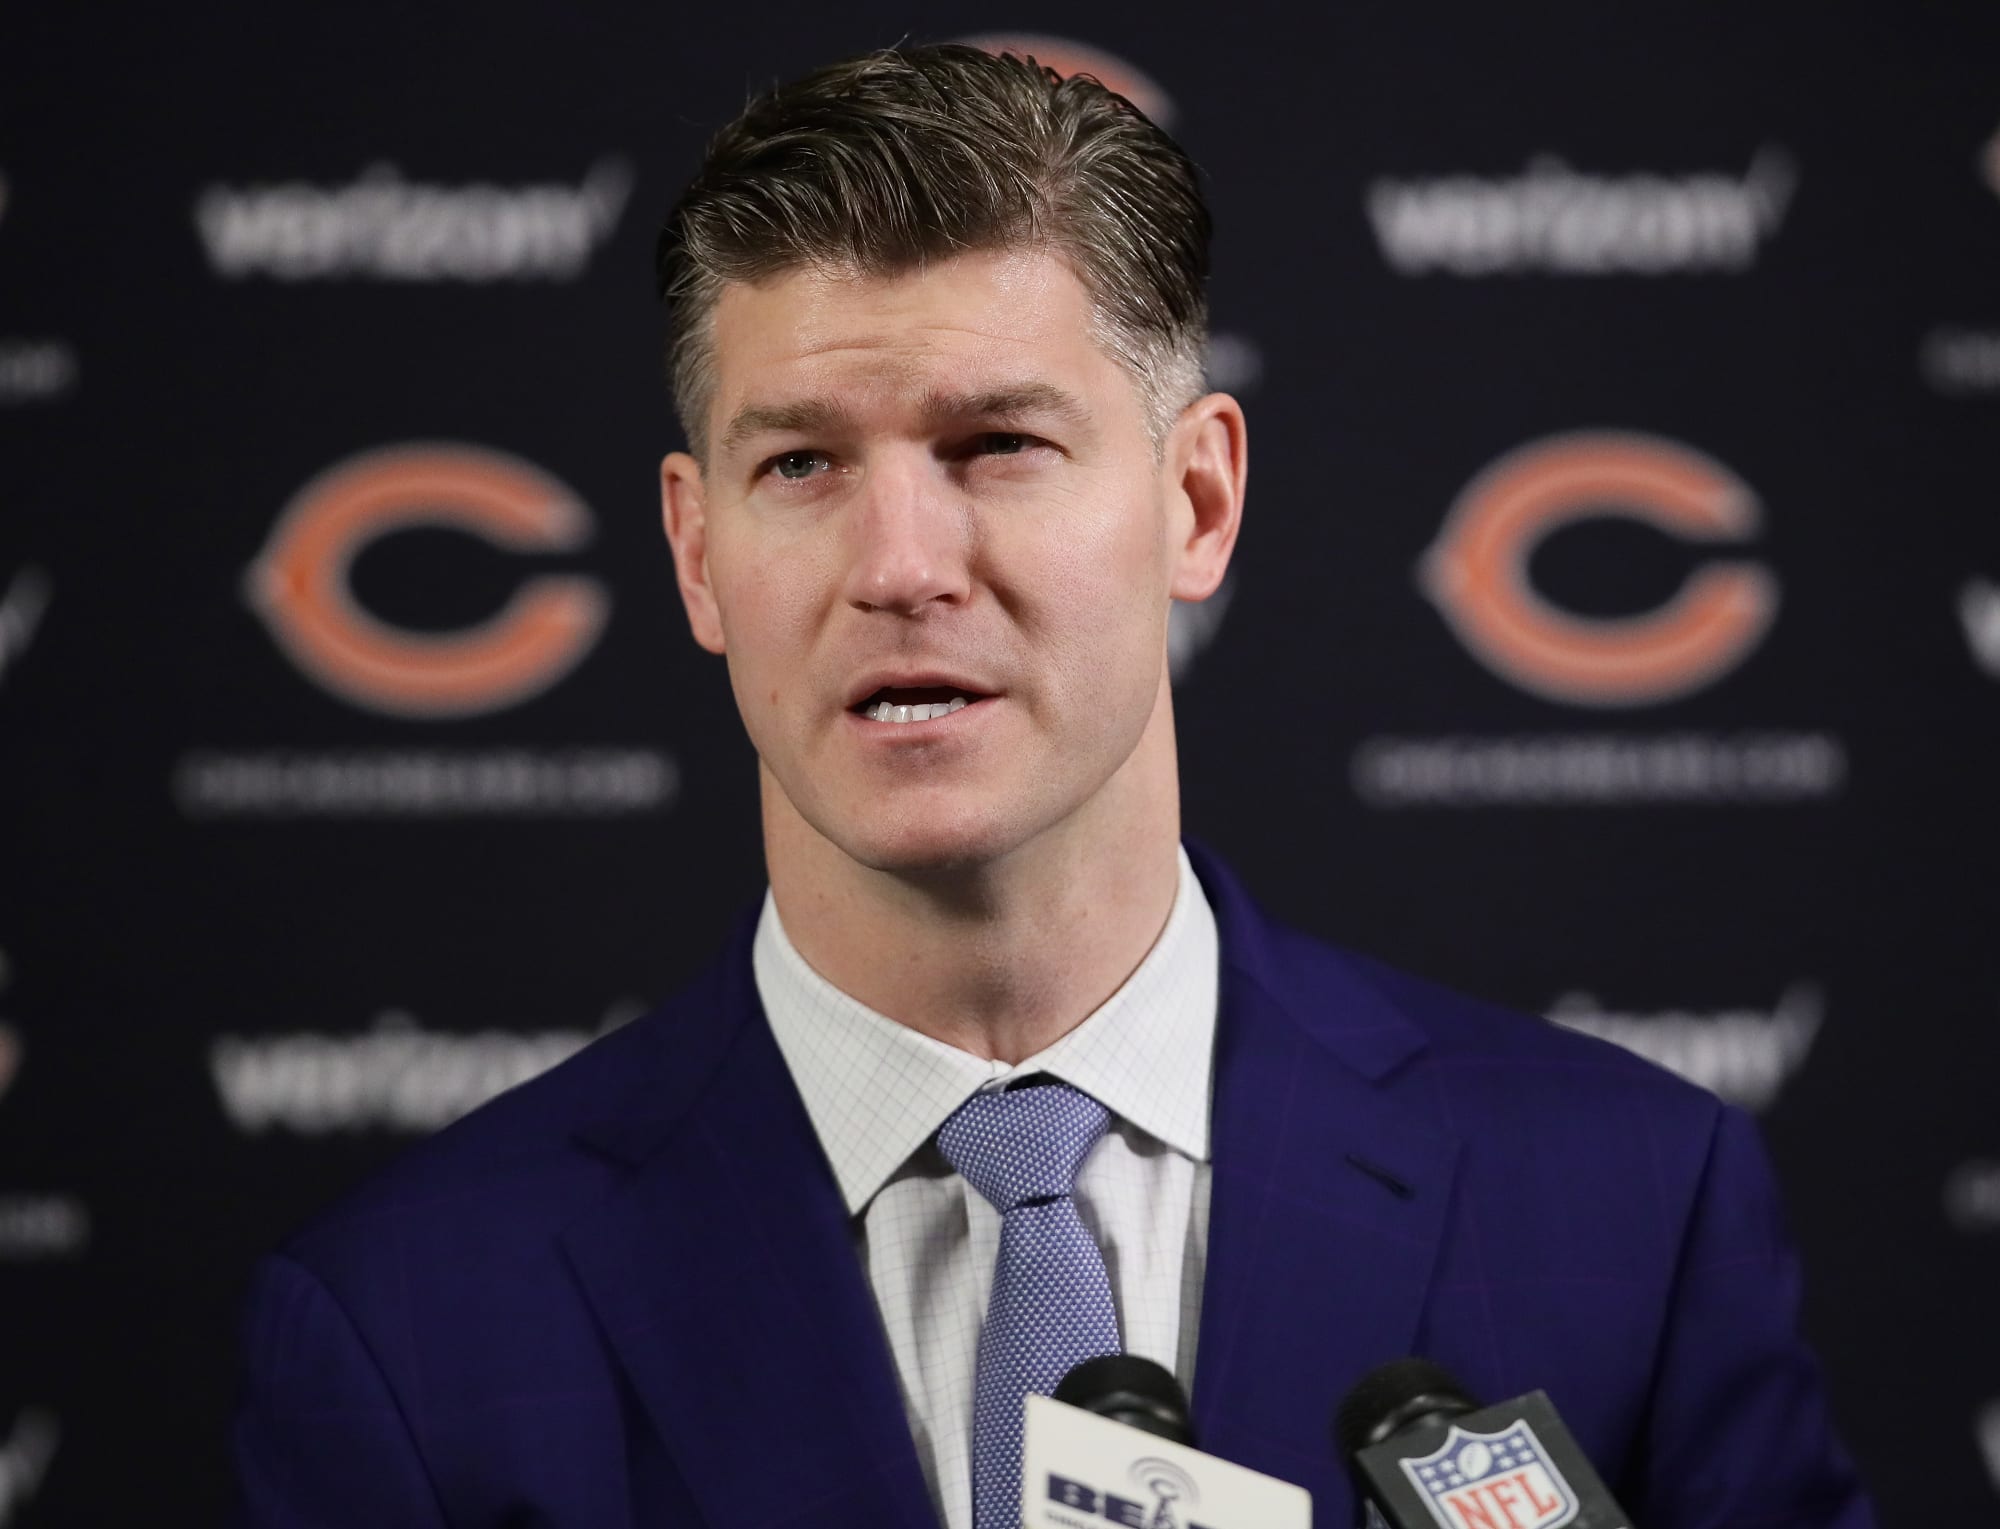 Chicago Bears Pace, Nagy confirm heated quarterback competition